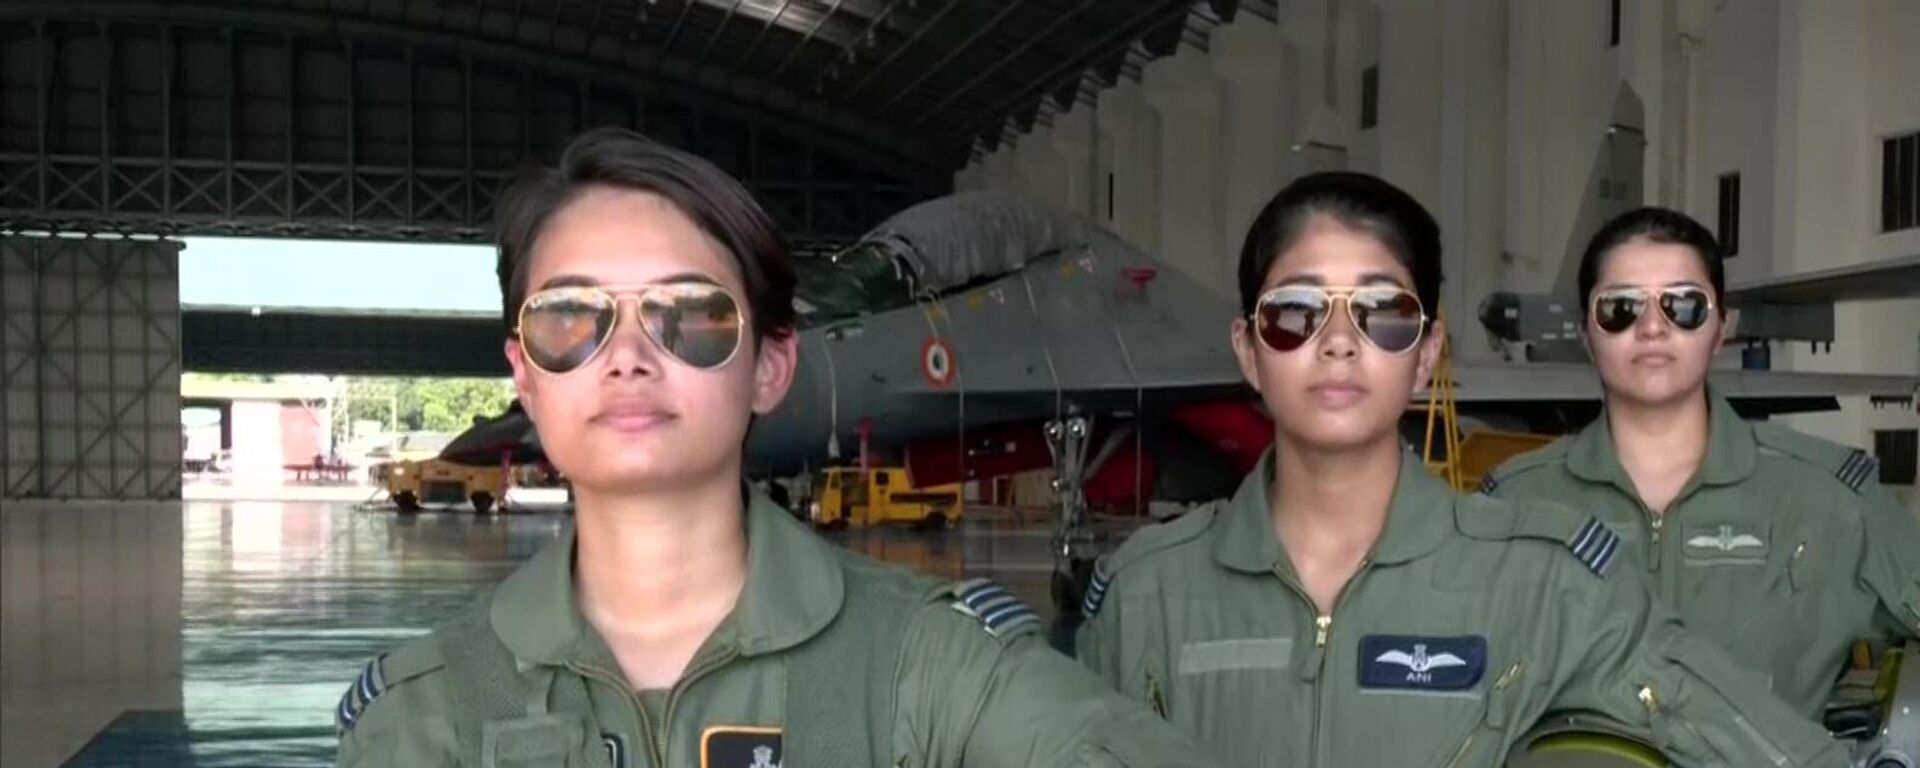 Meet Flight Lieutenant Tejaswi the only female Weapon System Operator in the deadly Sukhoi-30 fighter fleet of the Indian Air Force said on Tuesday that pilots in the eastern sector were prepared to respond to any situation in the region - Sputnik International, 1920, 27.09.2022